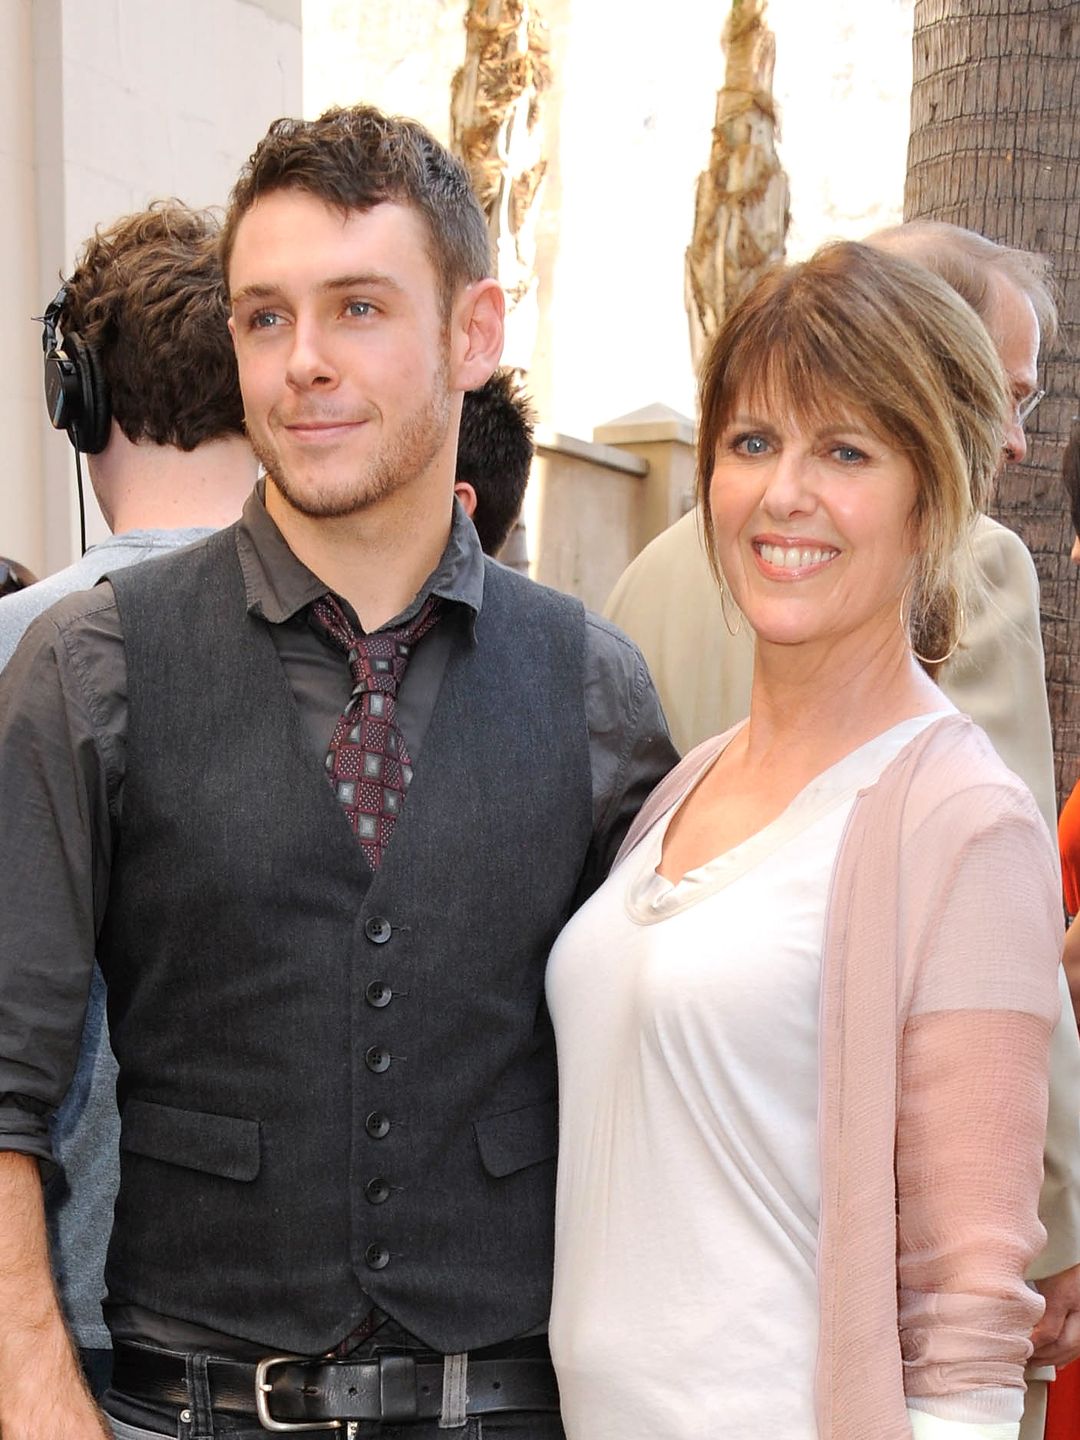 Pam Dawber and son Sean Harmon participate in the  Mark Harmon star ceremony on the Hollywood Walk of Fame on October 1, 2012 in Hollywood, California